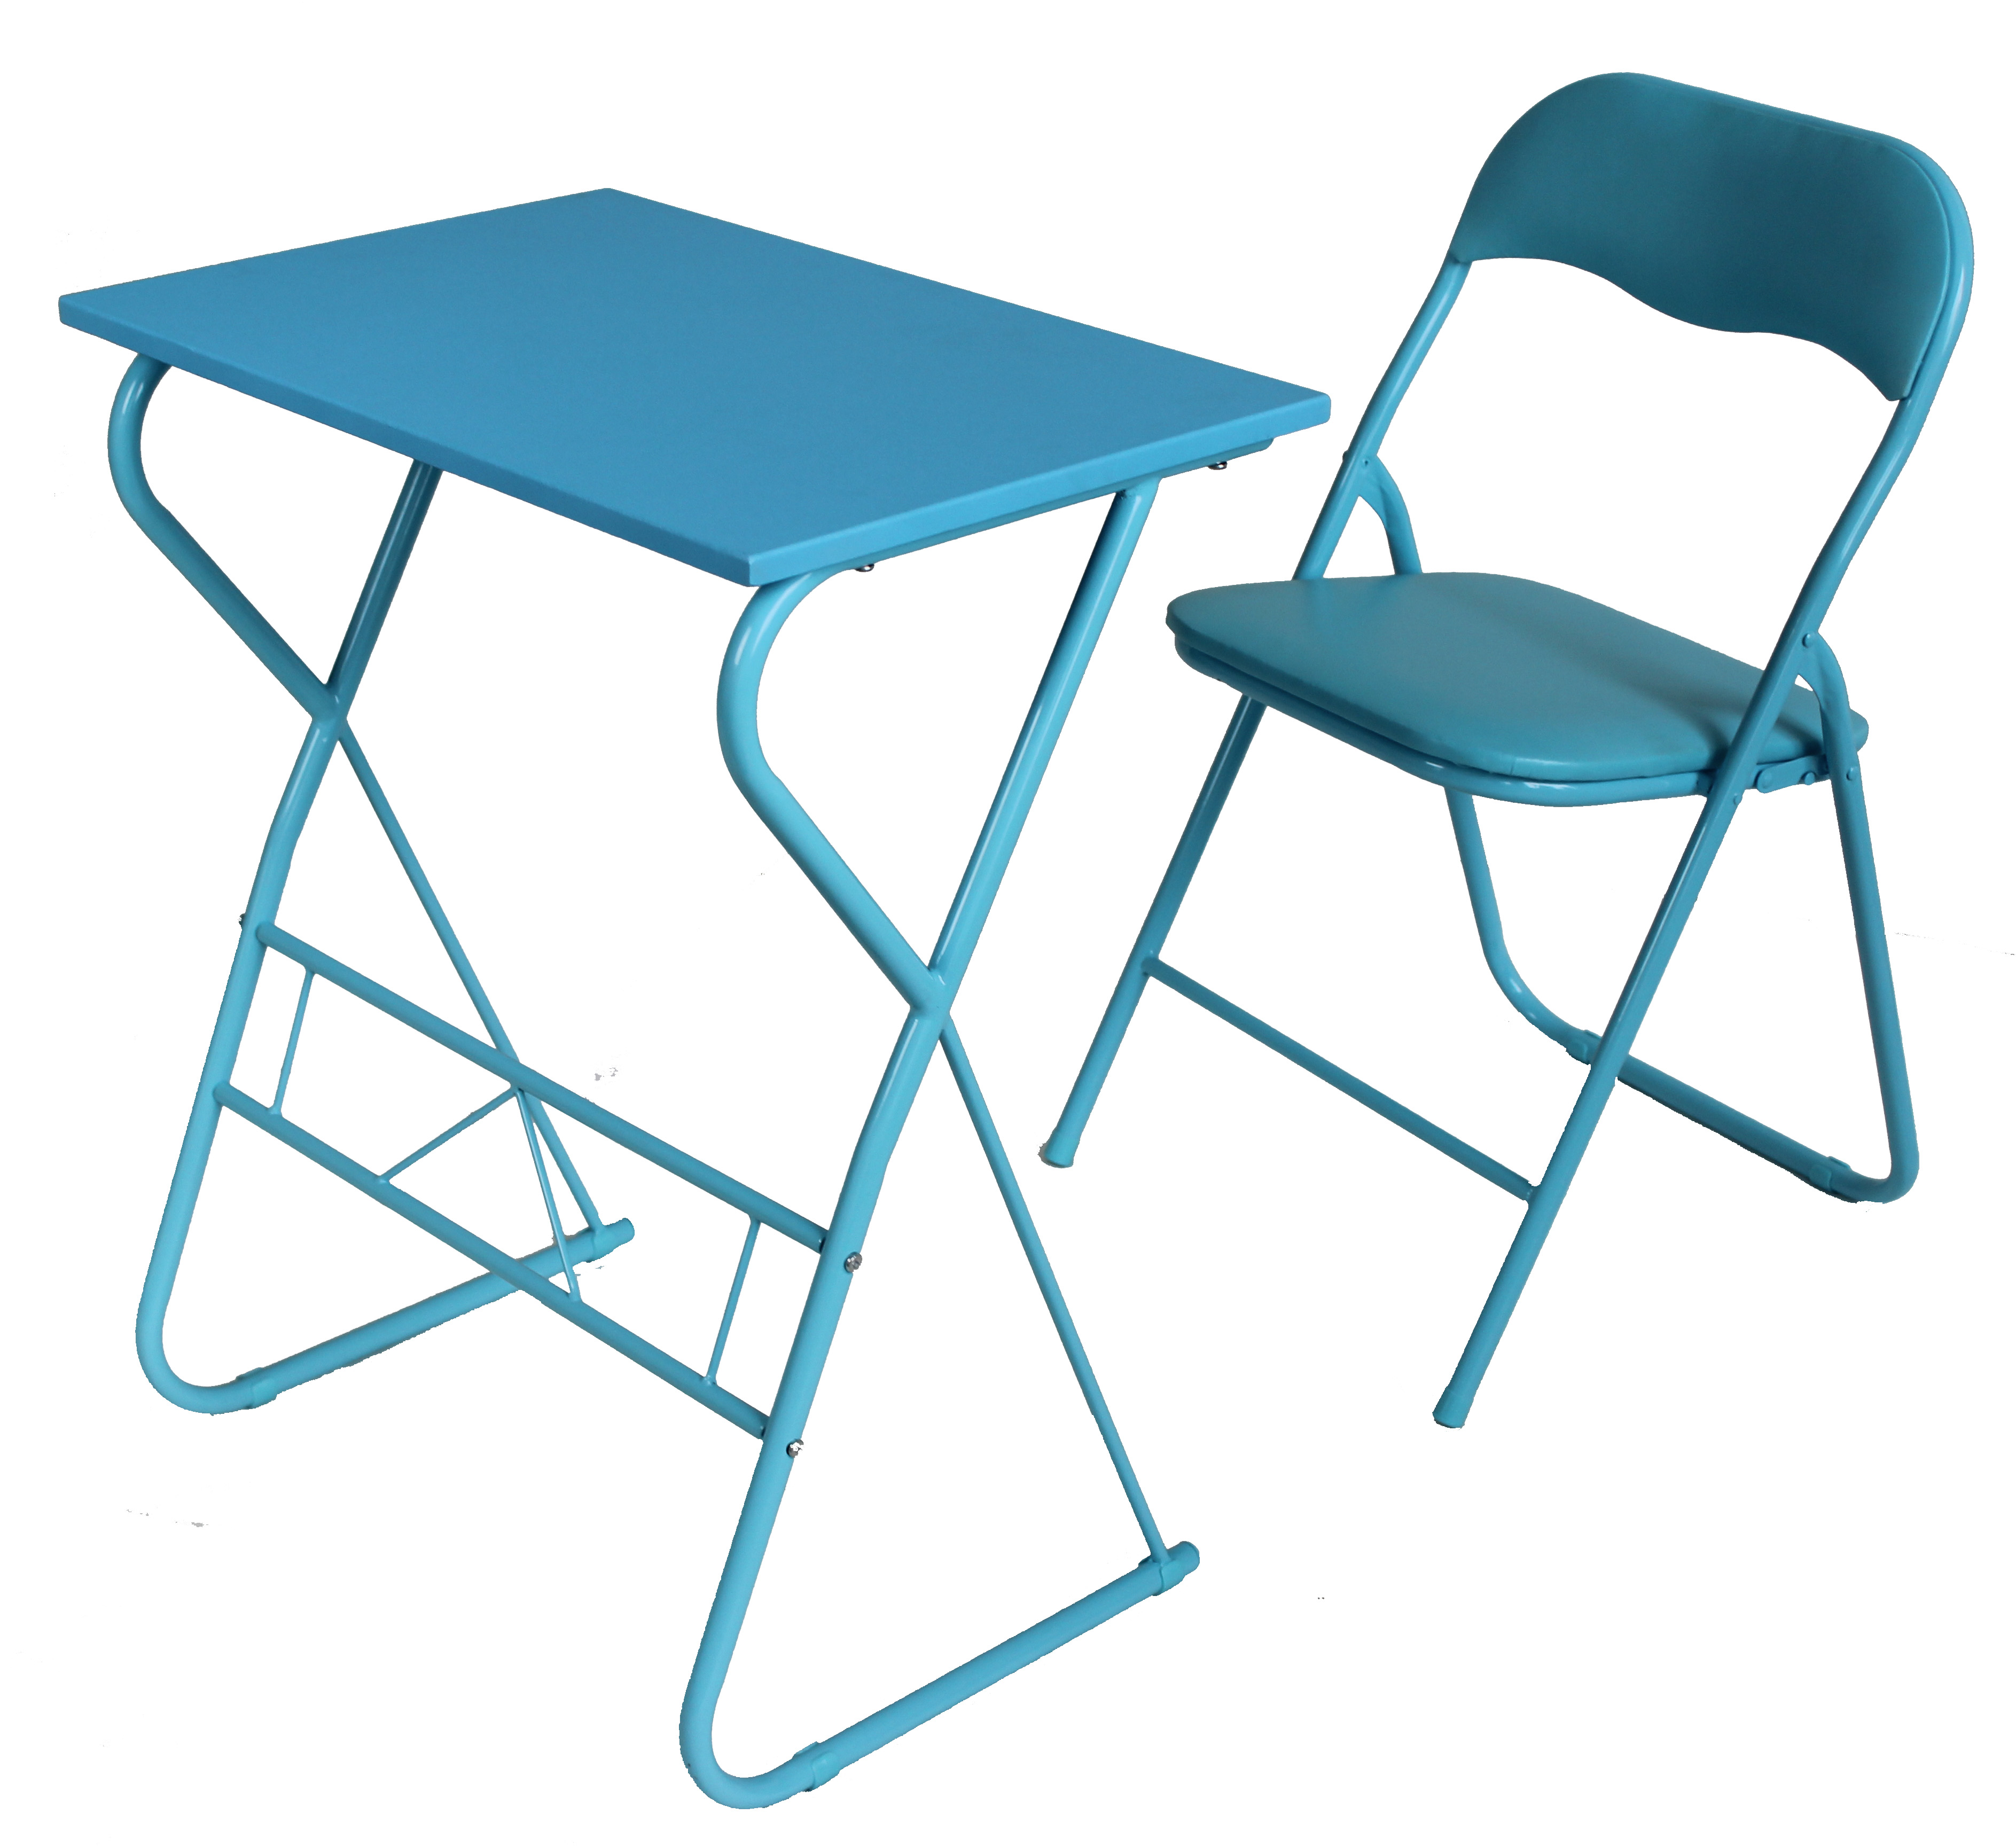 6TC-004 Study Table and Chair 1+1 for Students, Study Desk Set